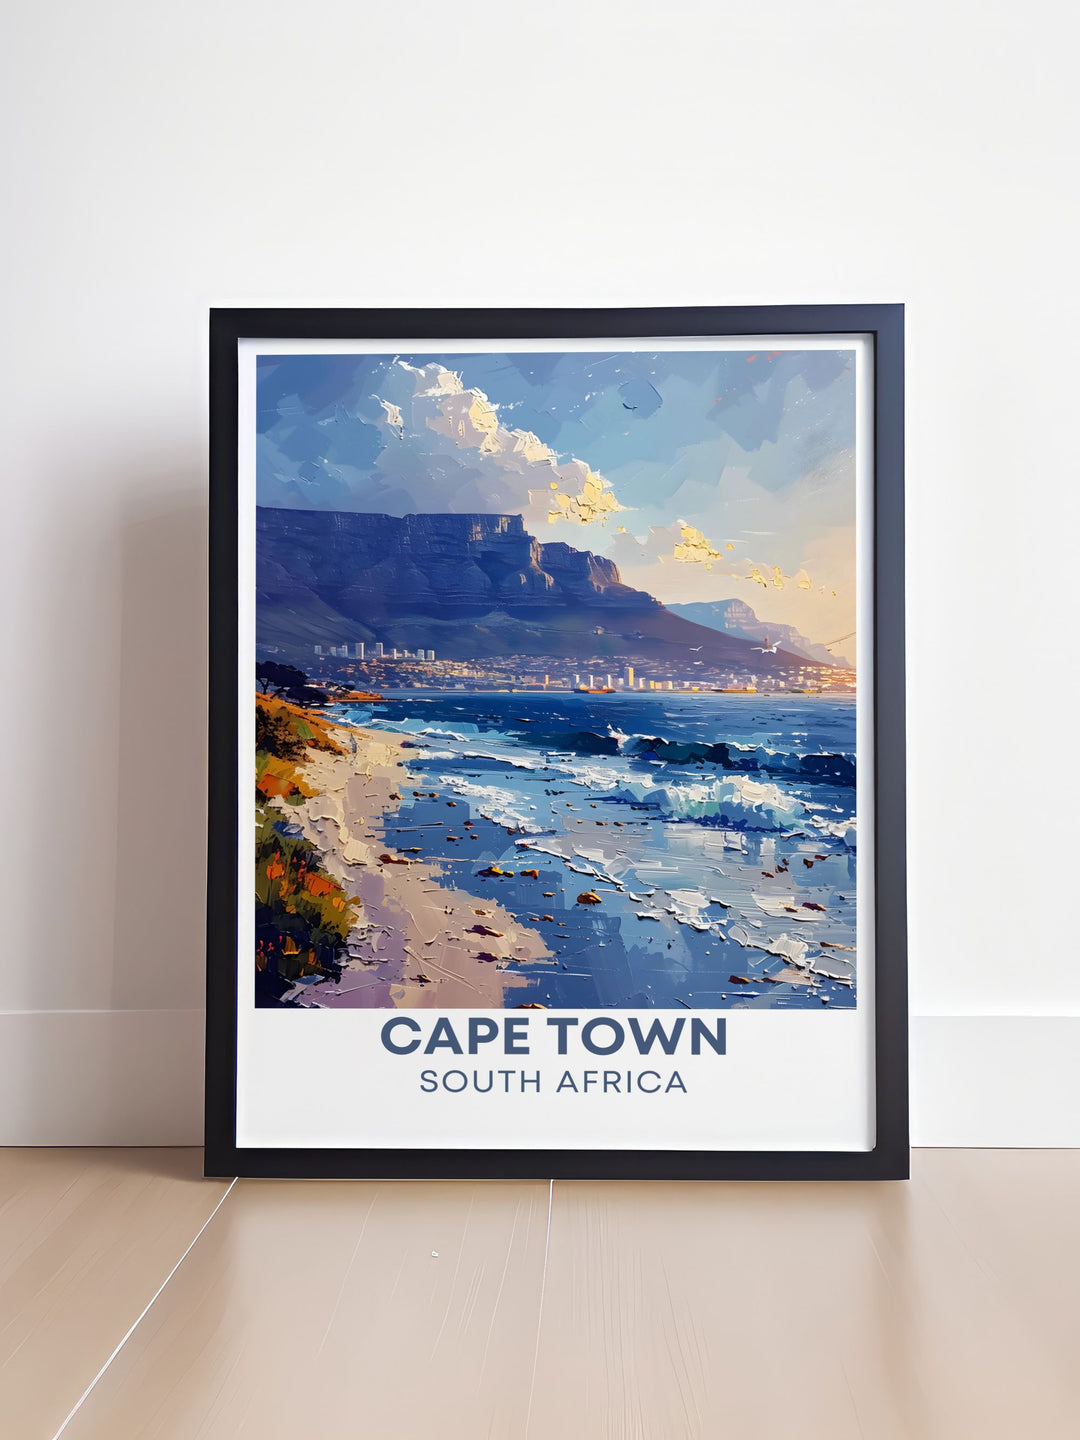 The captivating blend of rugged landscapes and urban vistas in Cape Town and Table Mountain is beautifully illustrated in this poster, making it a stunning addition to any wall art collection celebrating South Africa.